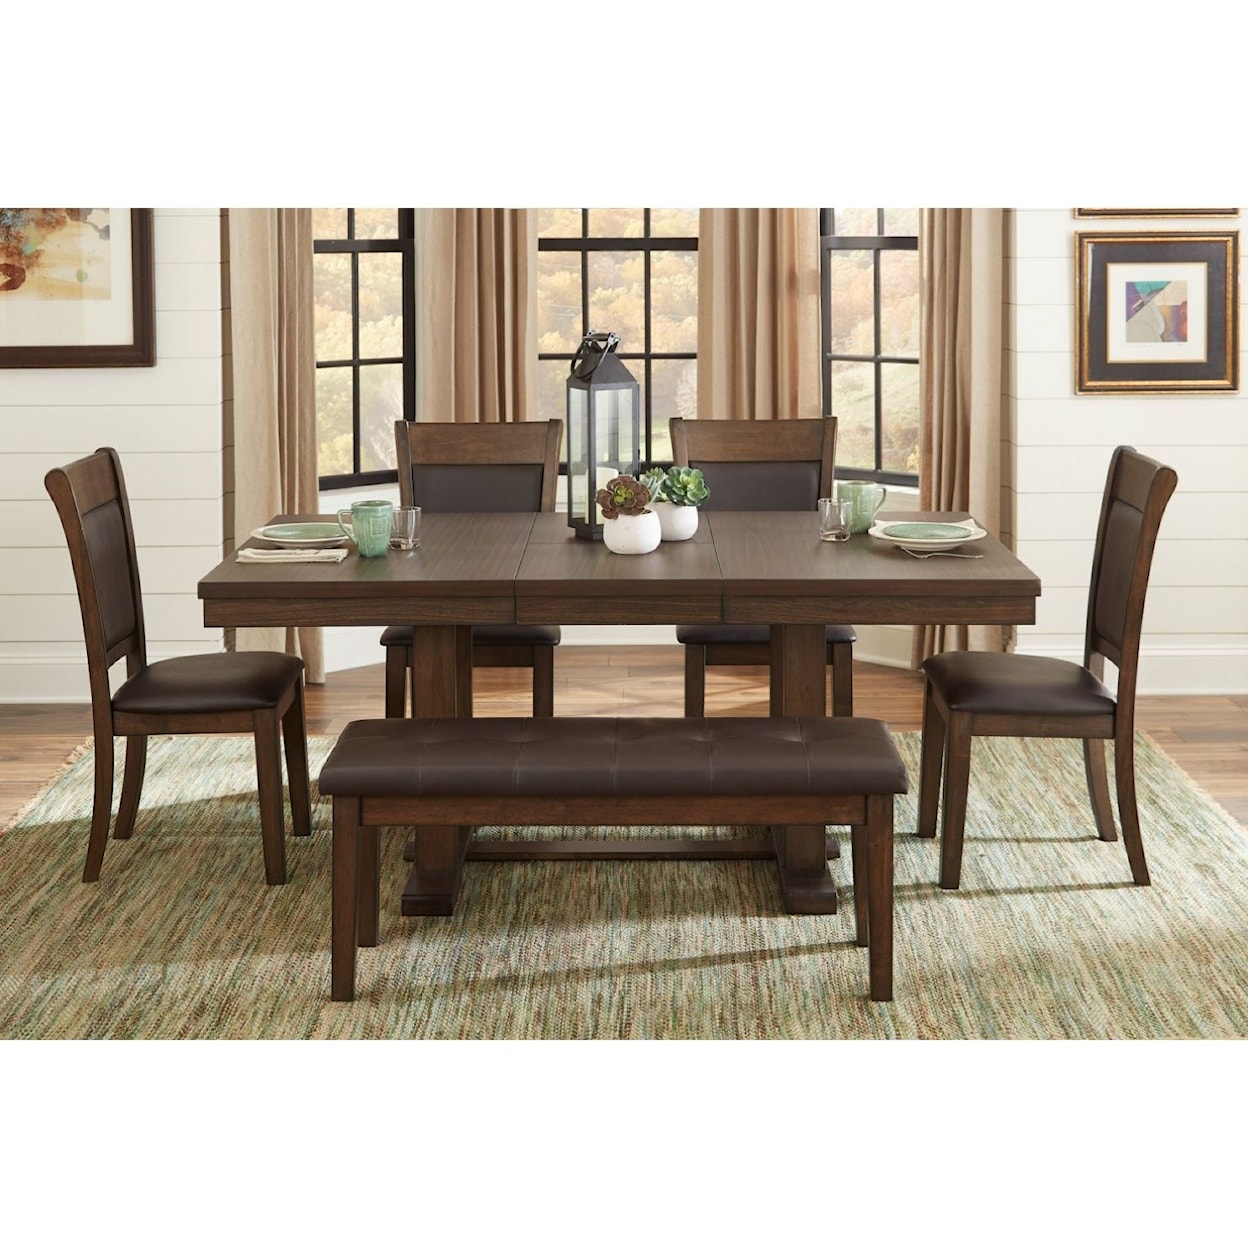 Homelegance Furniture Wieland 6-Piece Table and Chair Set with Bench